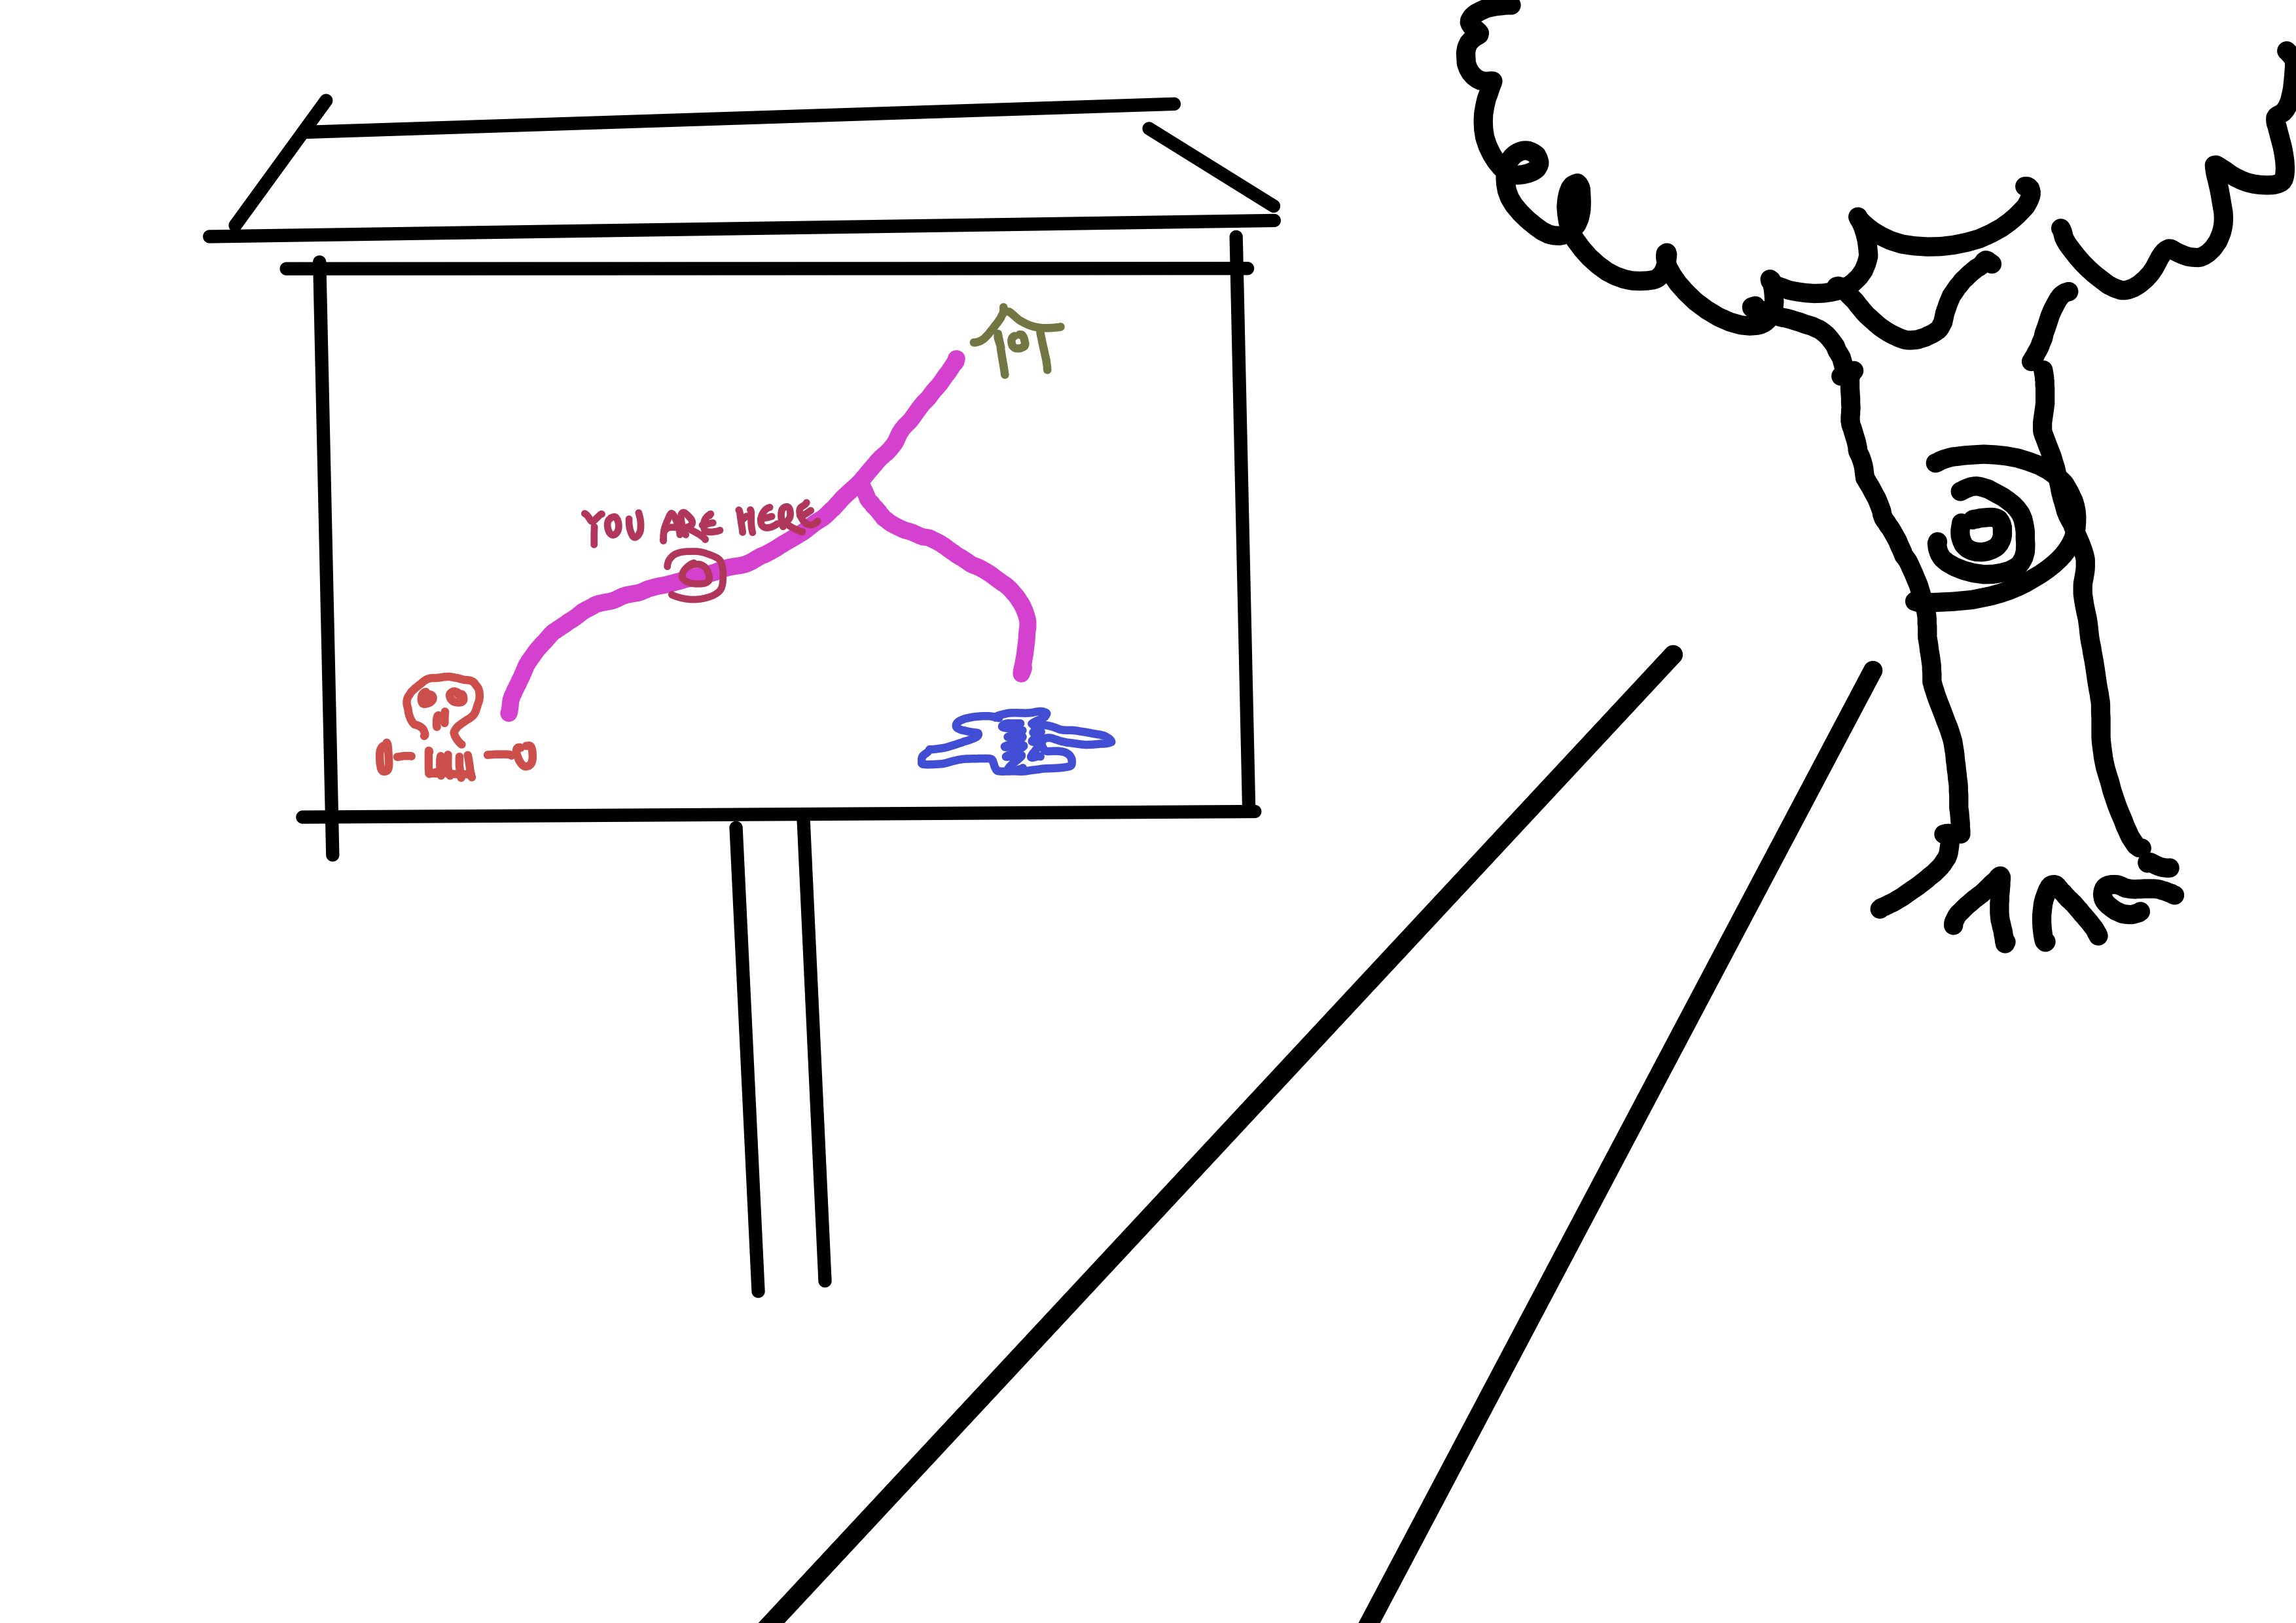 A sketch showing a straight trail with a map to the left and a tree to the right a little into the distance. The map shows two trails in a T-shape. The following icons are at the end of the trails: house, lake, skull. There is also a you-are-here marking on the trail, on the leg between the skull and the T-crossing.